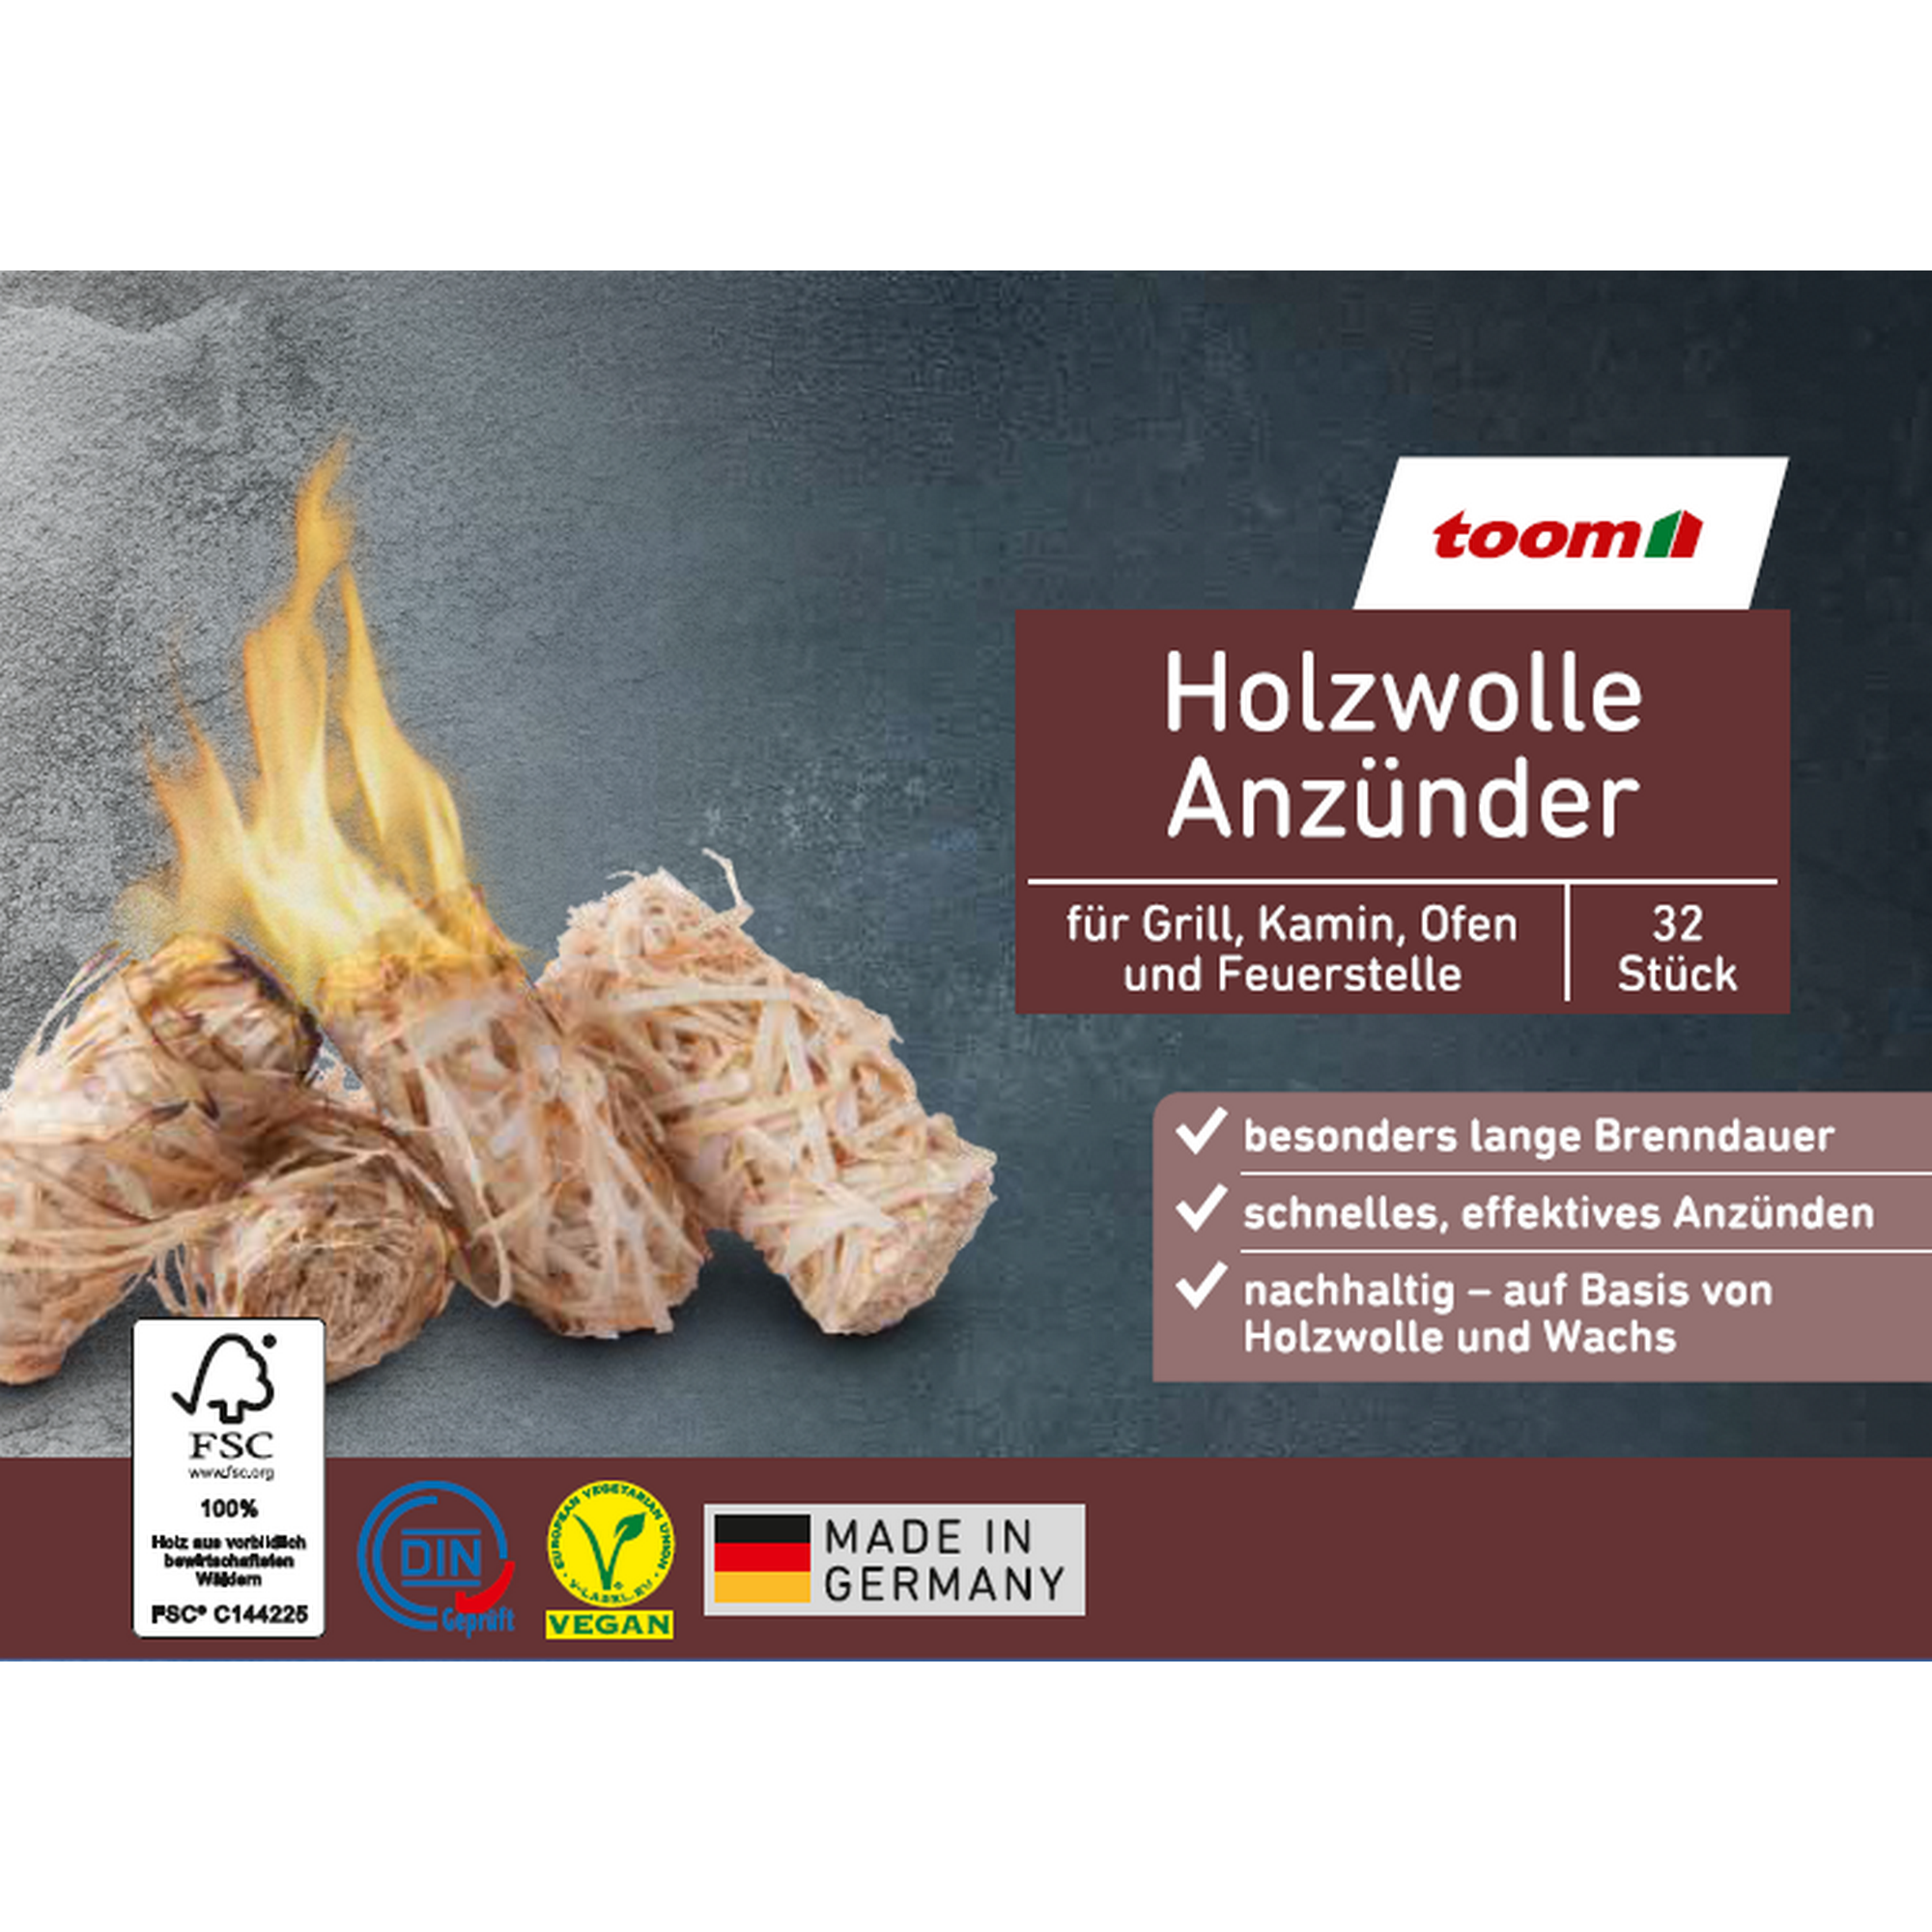 Holzwolle-Anzünder 32 Stück + product picture